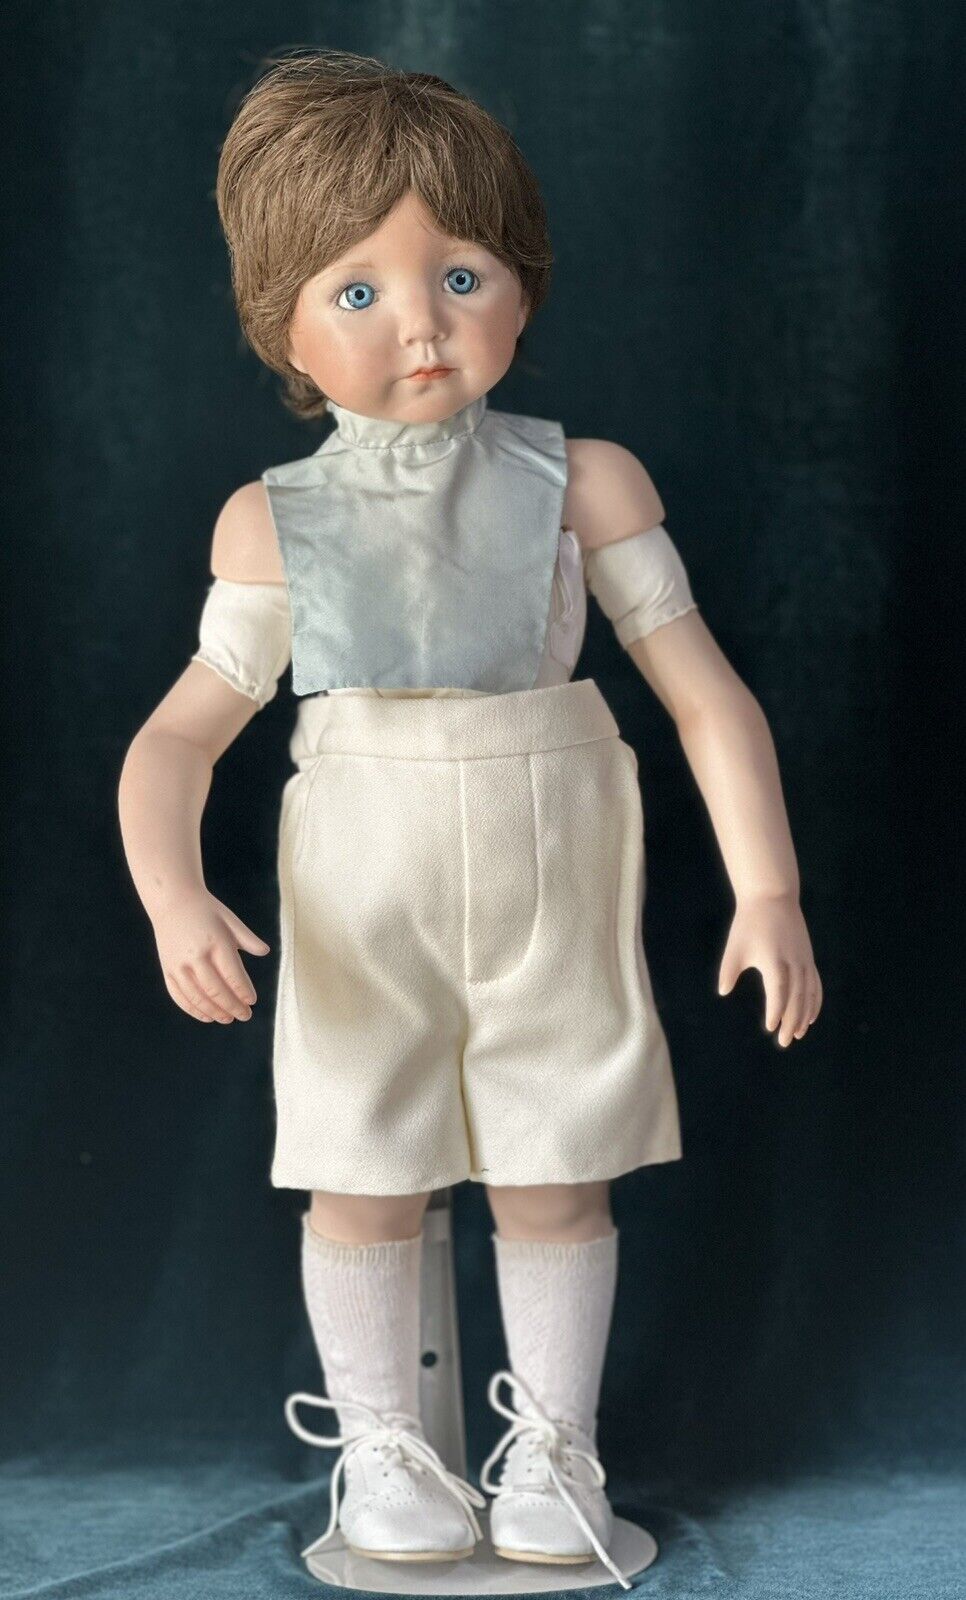 Artist Reproduction Of “Kayla” by Dianna Effner 18” Doll